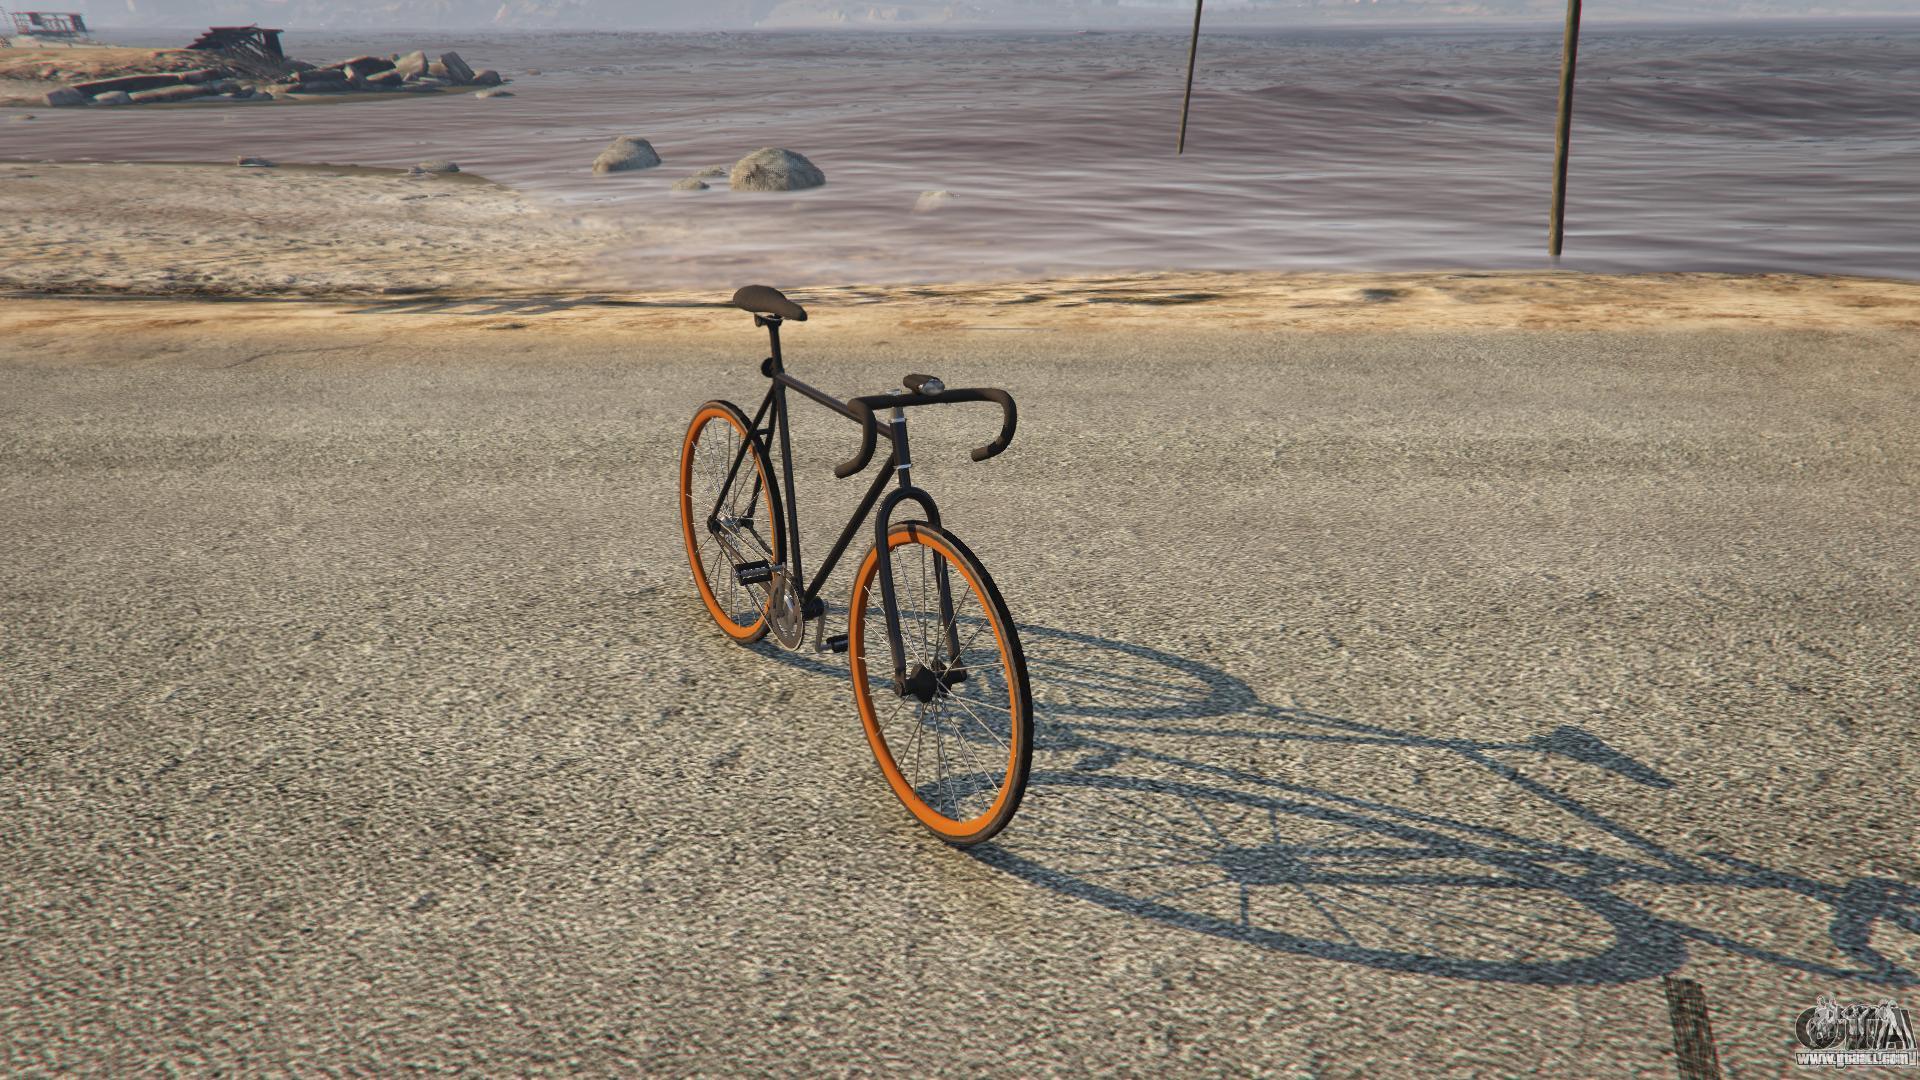 Cycles for GTA 5 best GTA 5 cycles completely for free